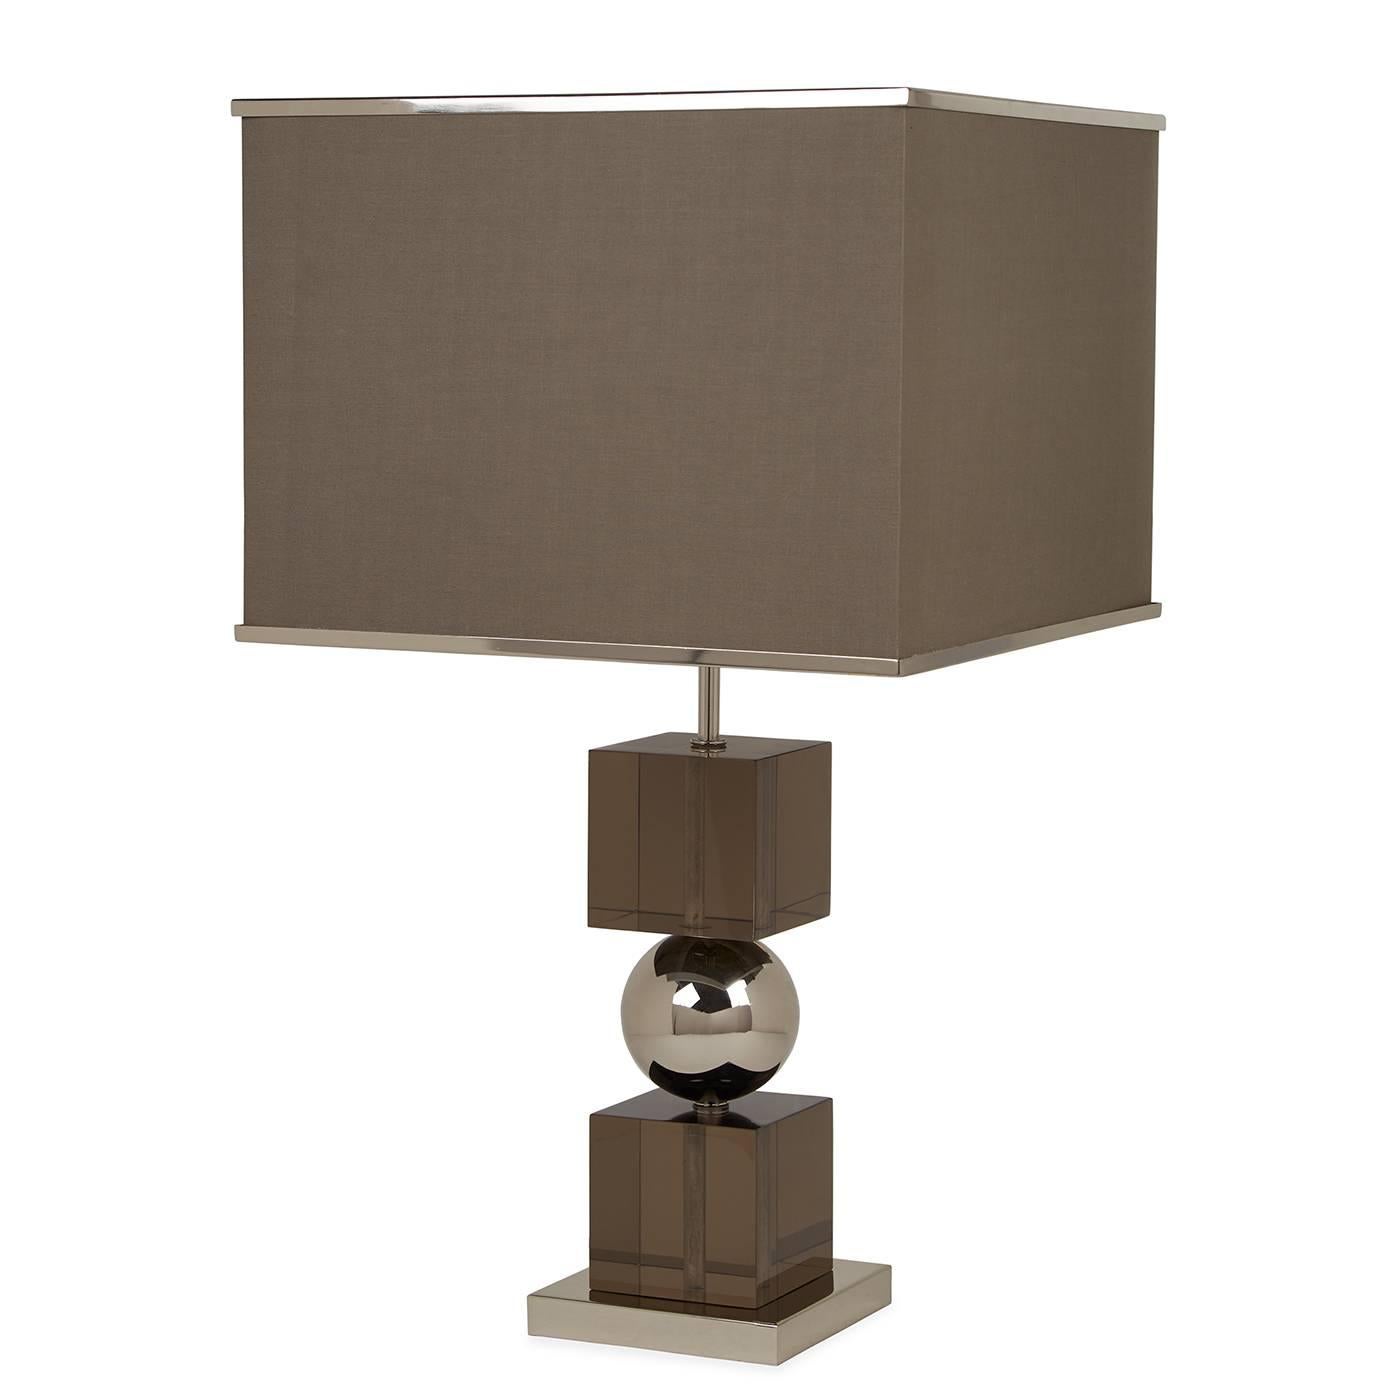 Clearly cool. Traditional elegance meets modern glamour in our Jacques stacked table lamp. Moody smoked Lucite cubes sandwich a stainless steel ball for gravity-defying glamour. A polished nickel trim gives a jewelry-like finish to the square fabric